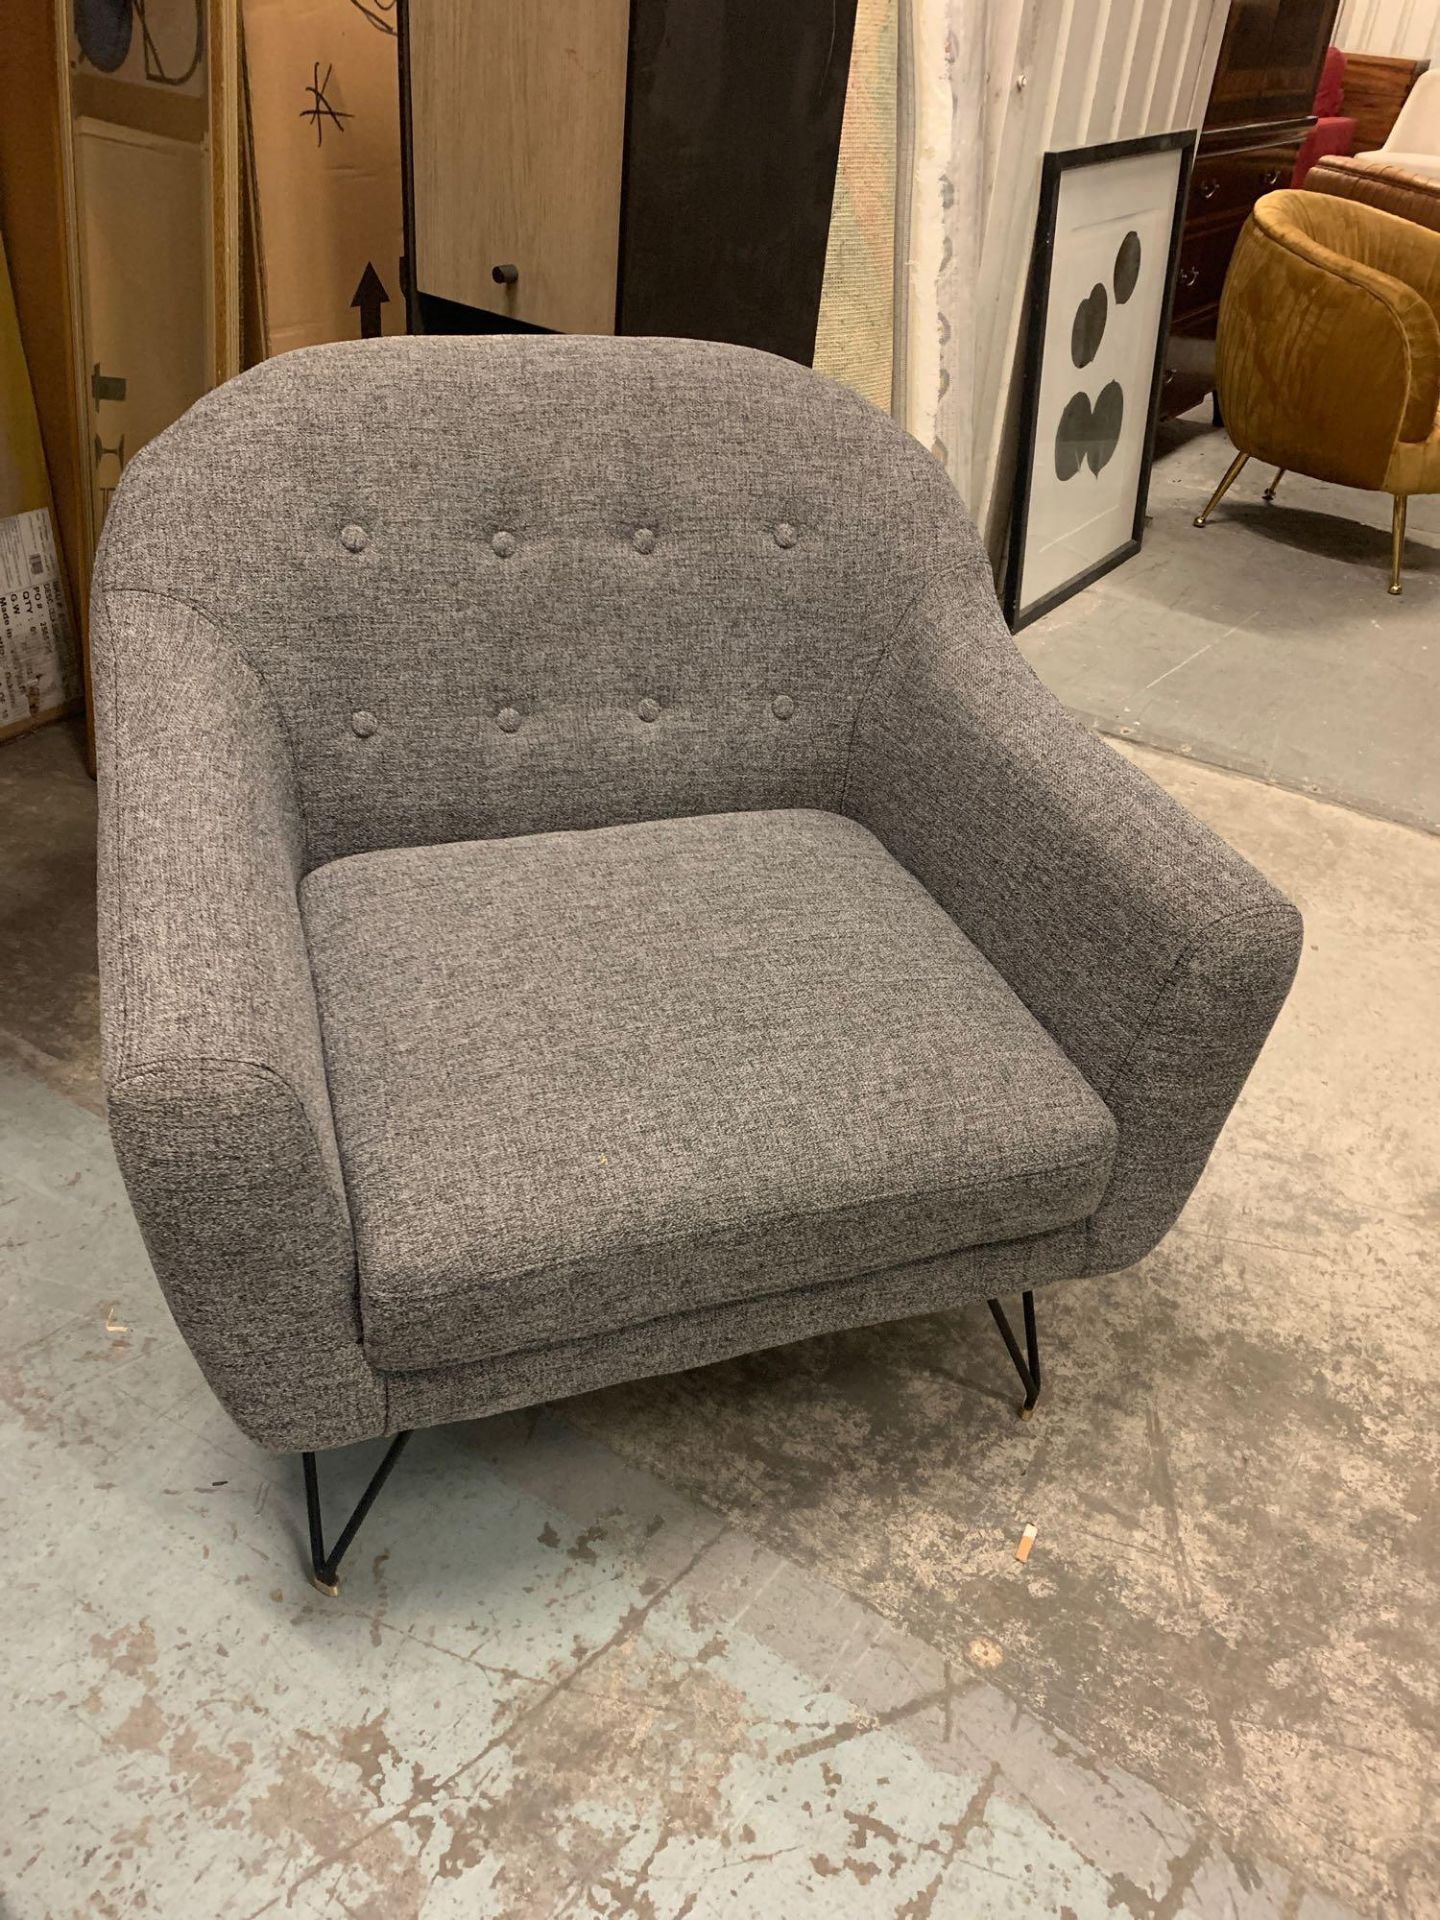 Volda Armchair Space Grey The Volda Armchair In Space Grey Is A Retro-Inspired Chair That Adds A - Bild 4 aus 4